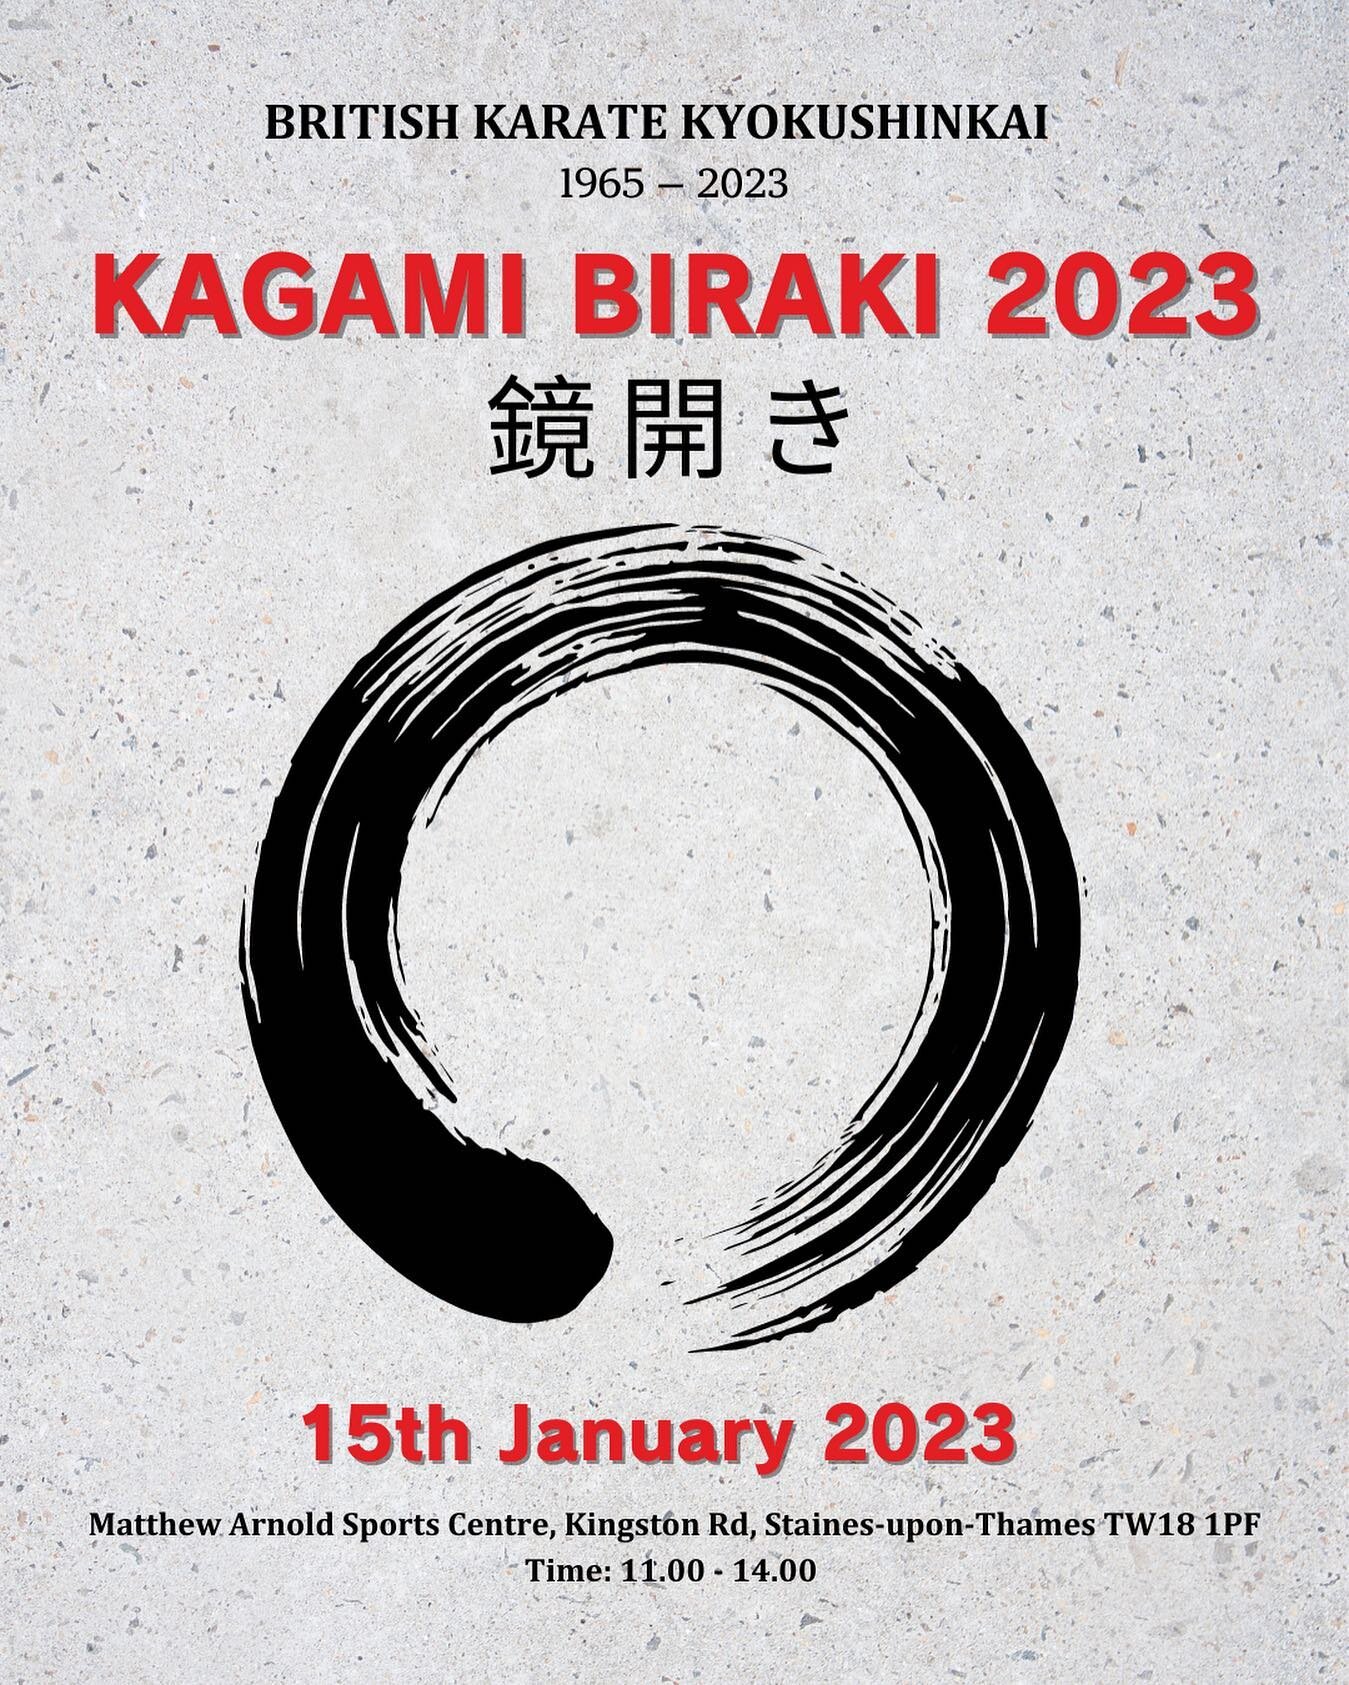 Kagami Biraki 2023 &ndash; after a two-year absence we are back on 15th January. 
Venue: Matthew Arnold Sports Centre, Kingston Rd, Staines-upon-Thames TW18 1PF Time: 11.00 - 14.00 
Full details will be announced very soon. 
A great start to the new 